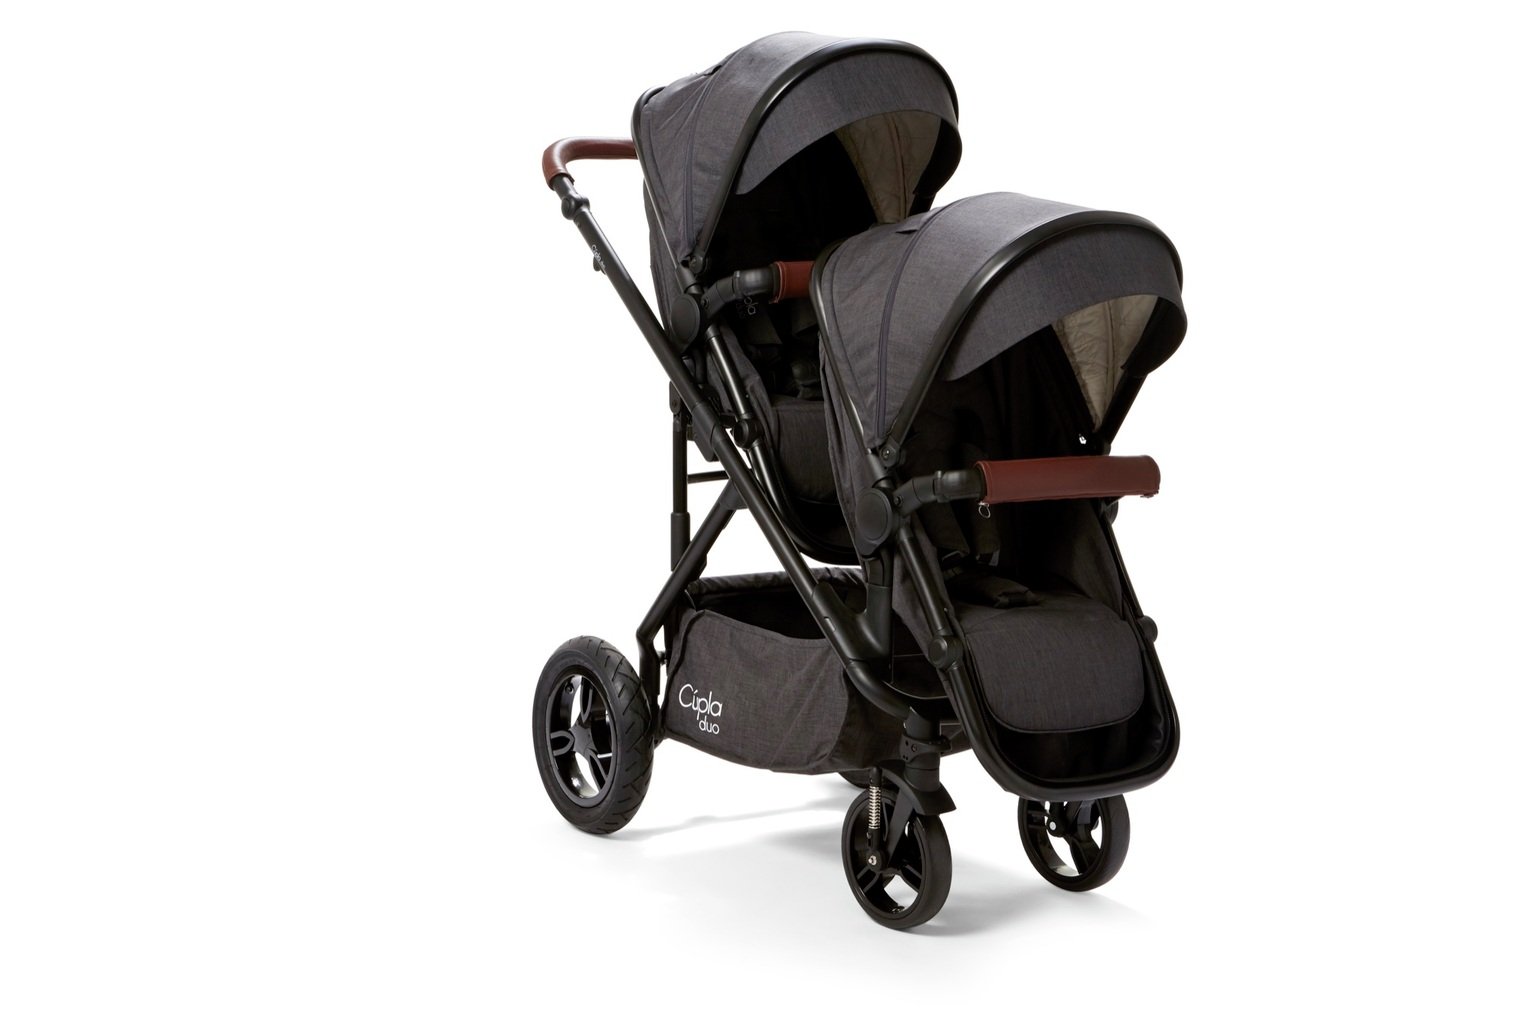 Baby Elegance Cupla Twin Travel System Review